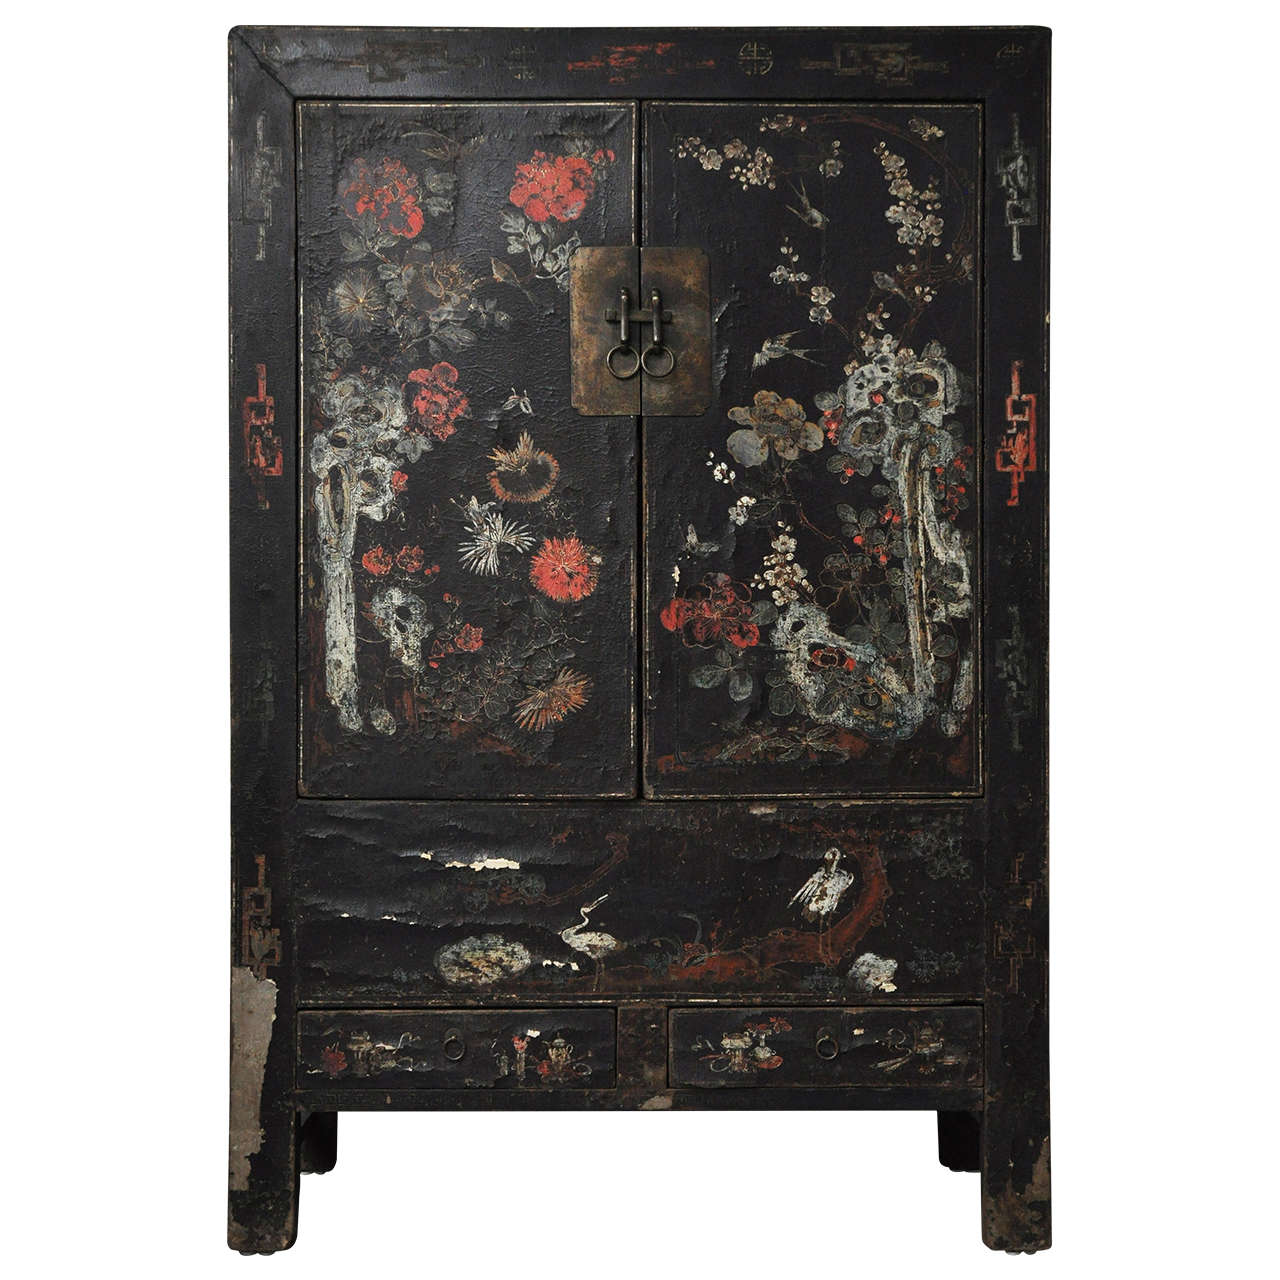 20th Century Chinese Black Lacquer Cabinet with Floral Design